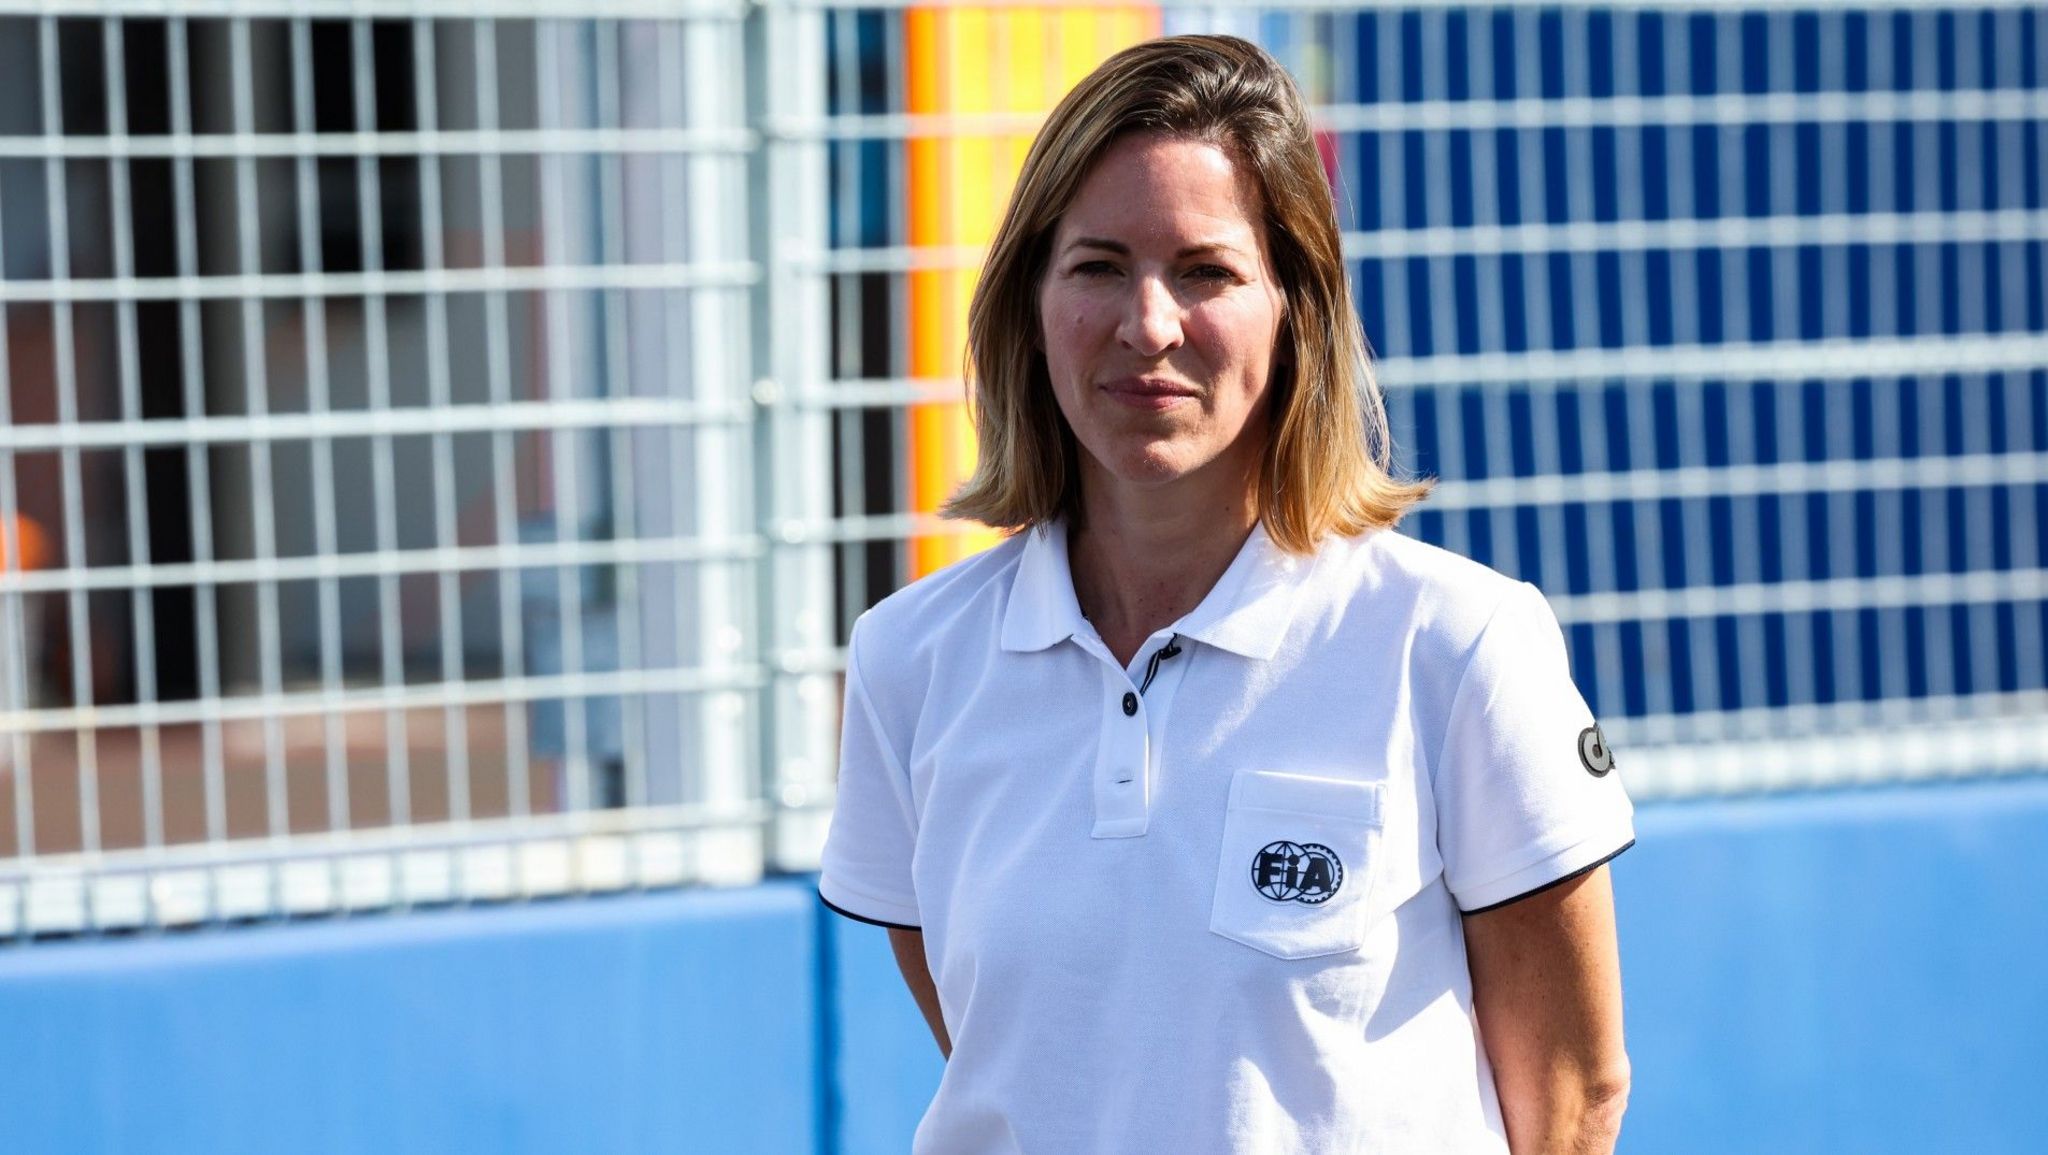 FIA's Chief Executive Officer Natalie Robyn Resigns Abruptly